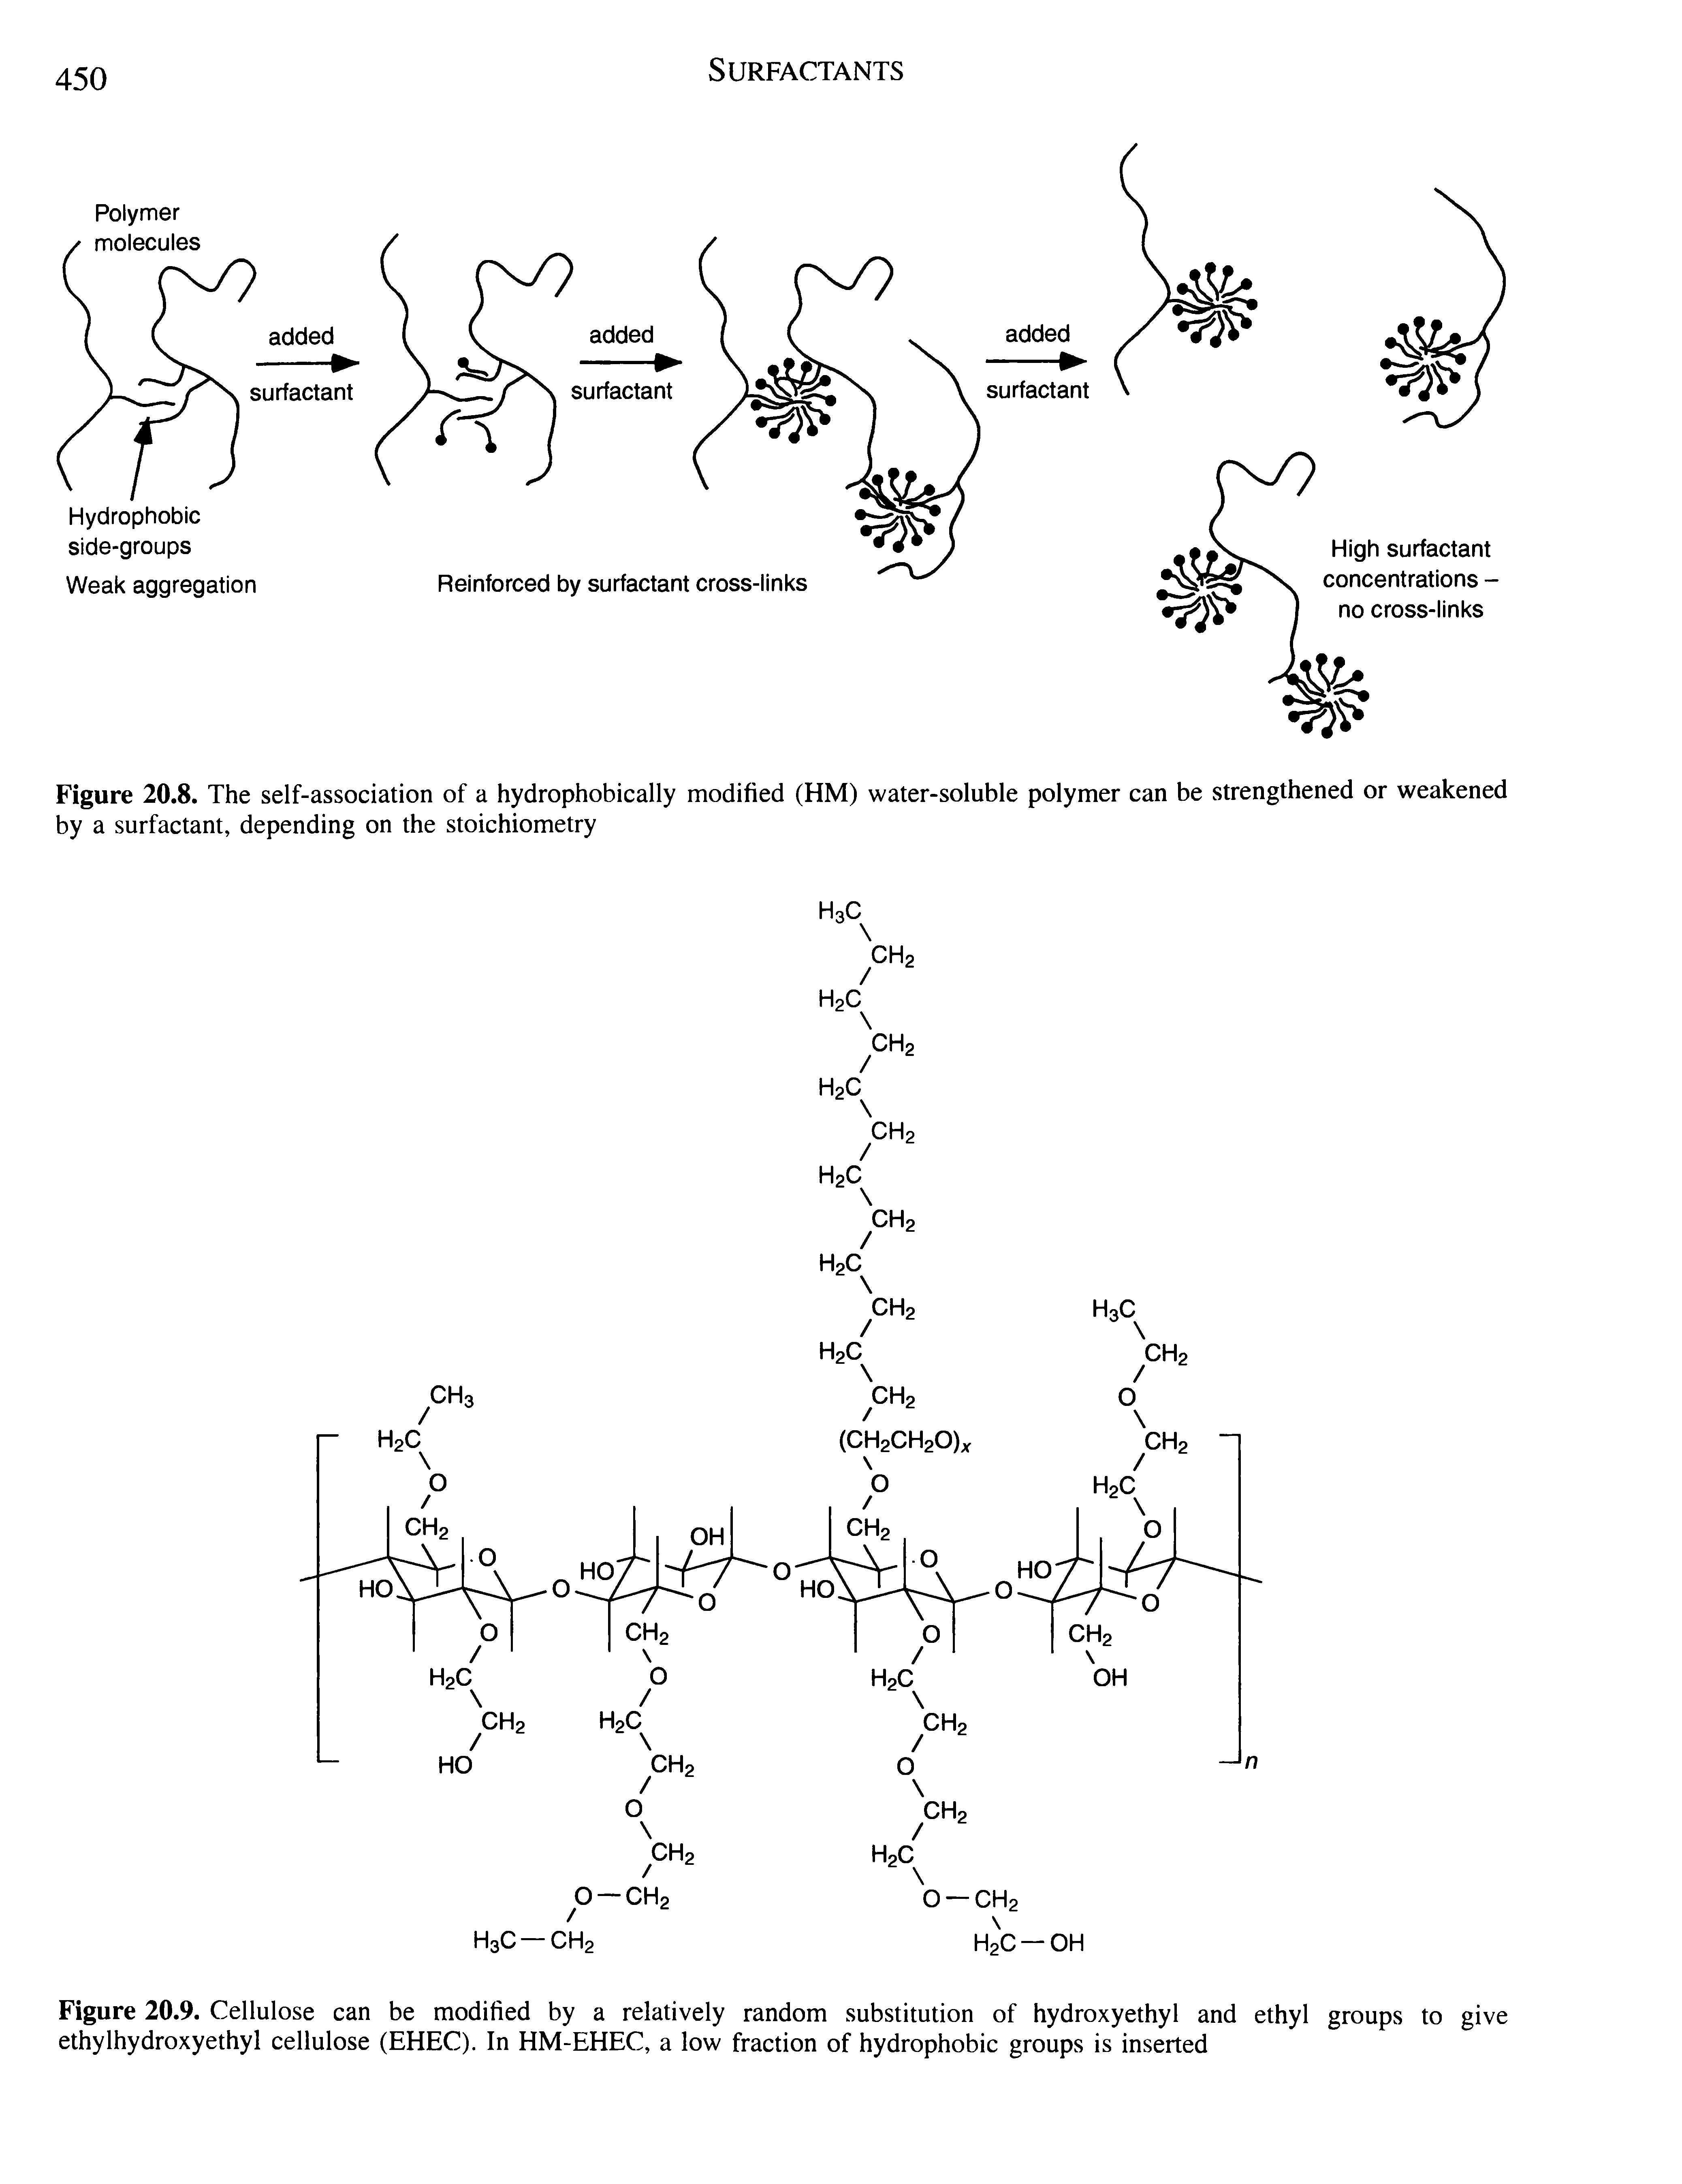 Figure 20.9. Cellulose can be modified by a relatively random substitution of hydroxyethyl and ethyl groups to give ethylhydroxyethyl cellulose (EHEC). In HM-EHEC, a low fraction of hydrophobic groups is inserted...